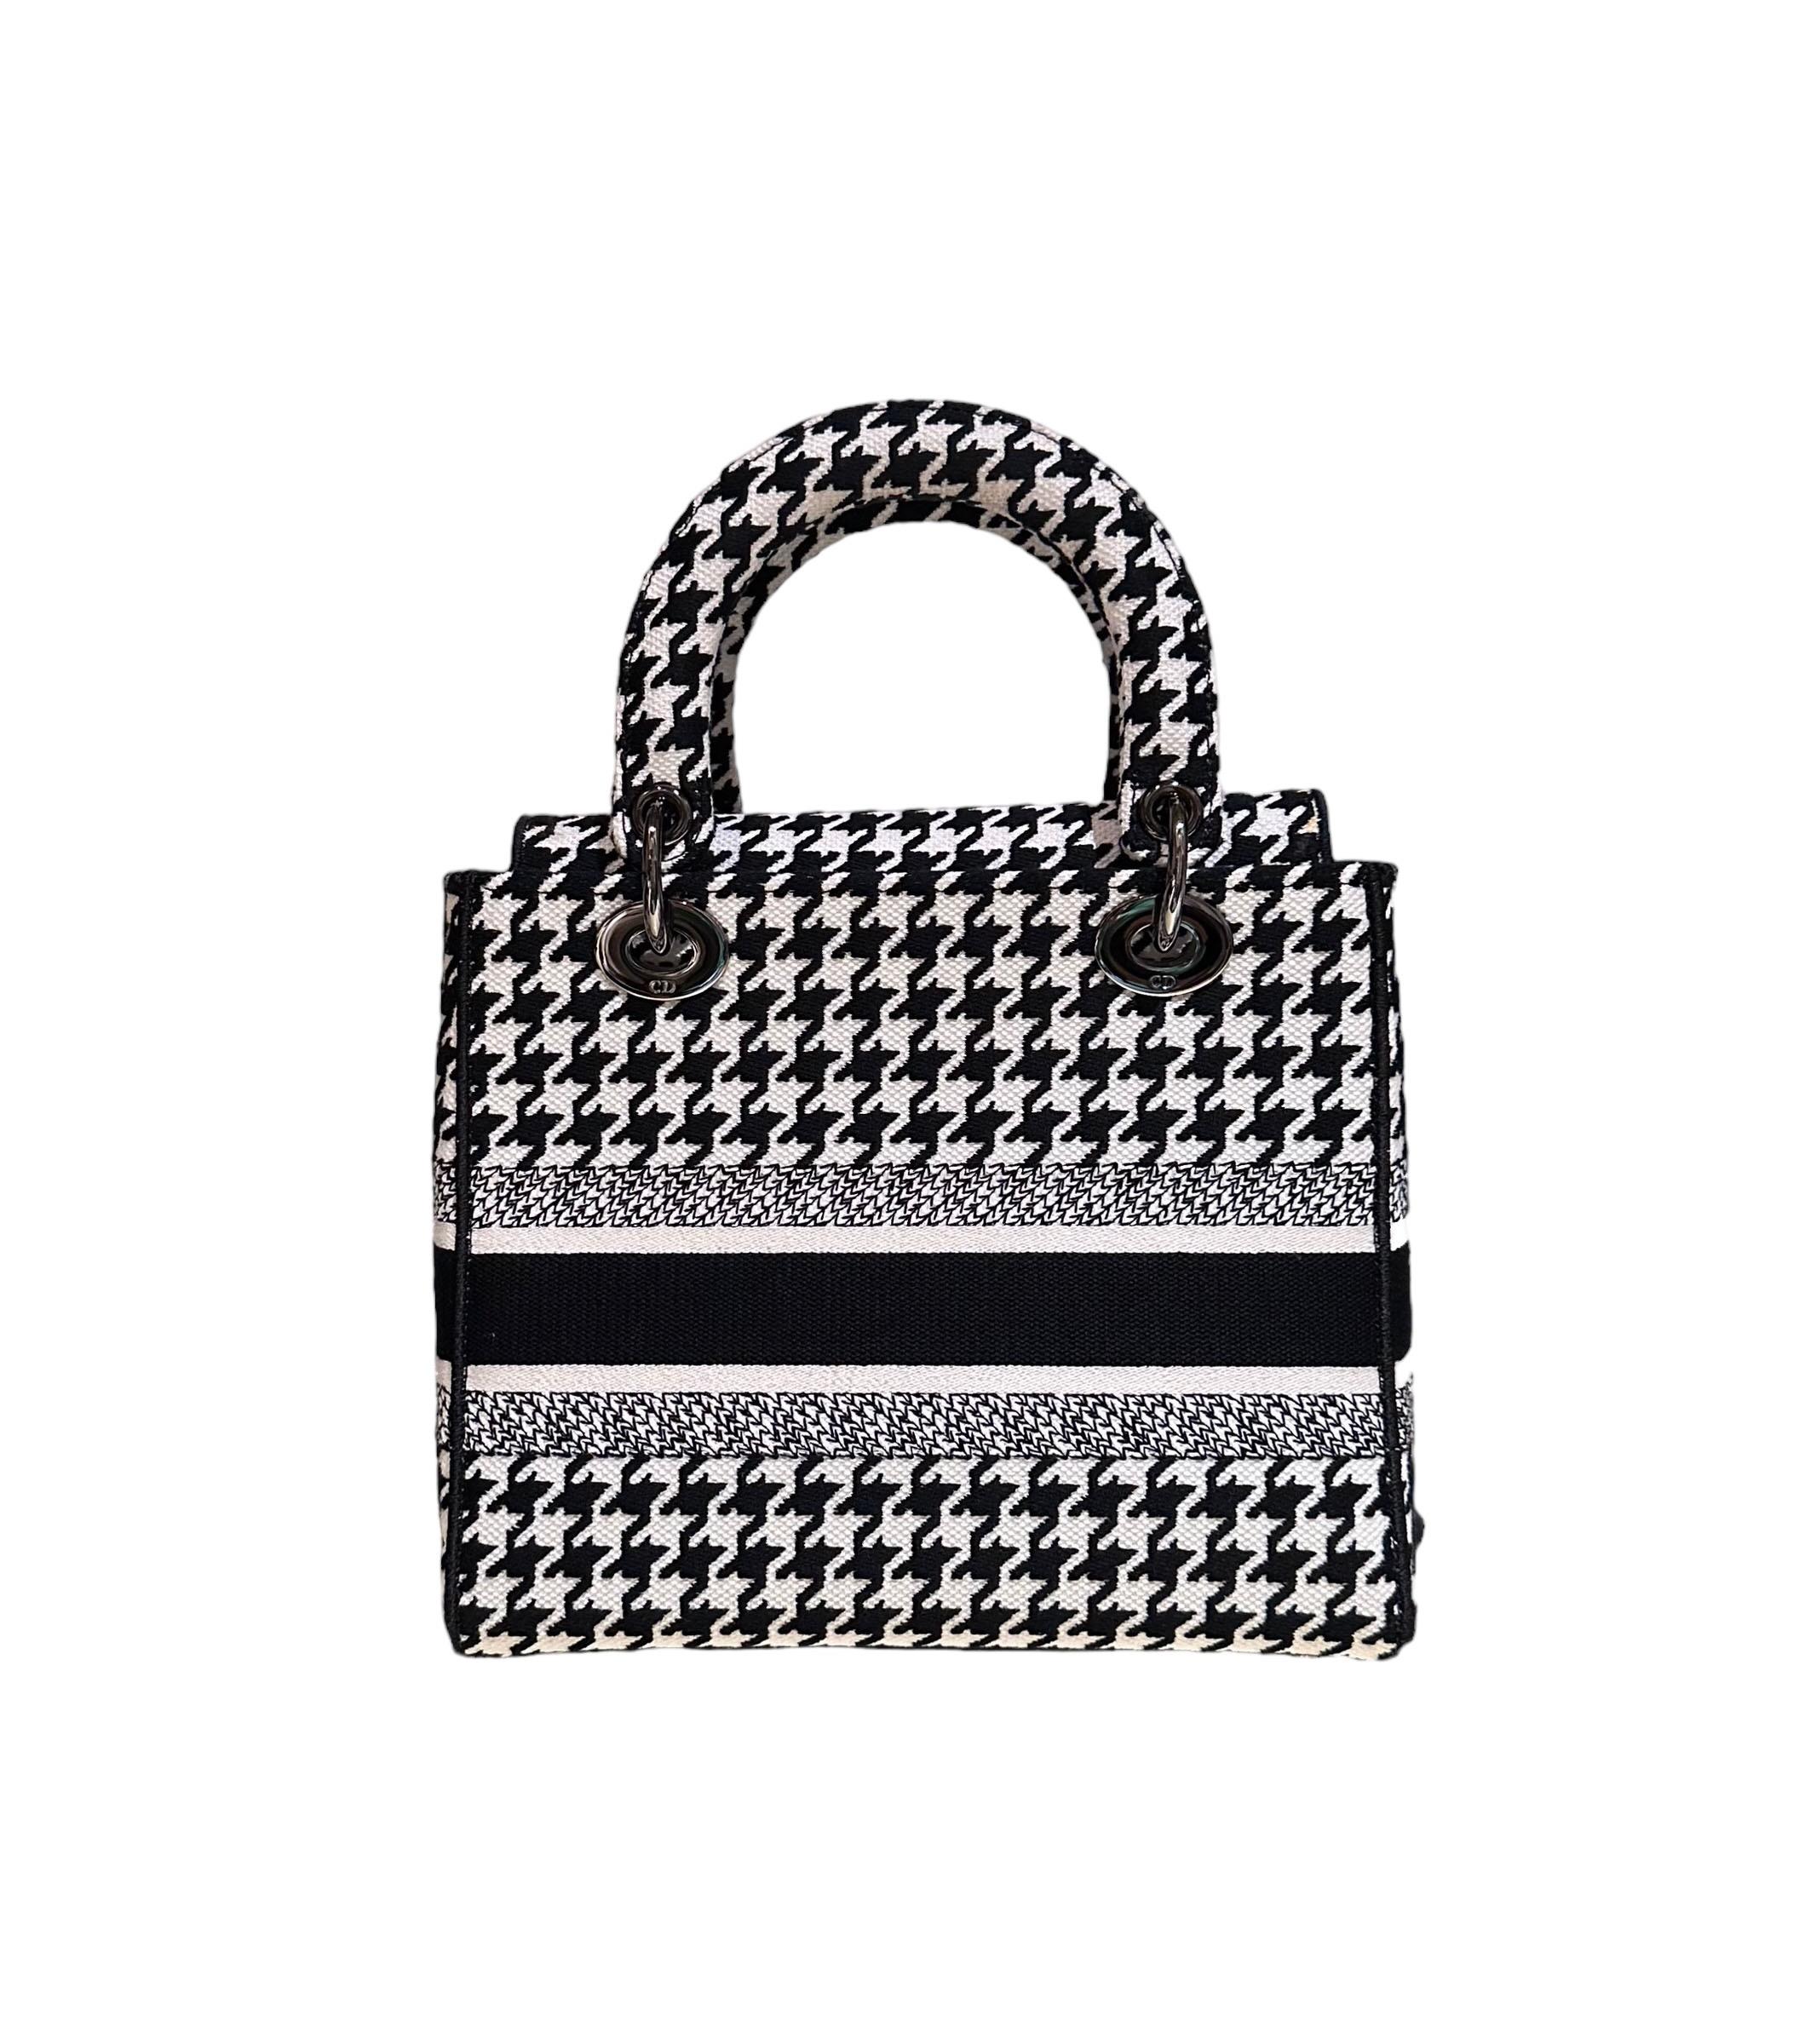 This pre-owned Lady D-Lite bag combines classic elegance with House modernity. The style is fully embroidered with the black and white Houndstooth motif, a play on the hallmark House pattern. 
The front features a Christian Dior Paris signature and